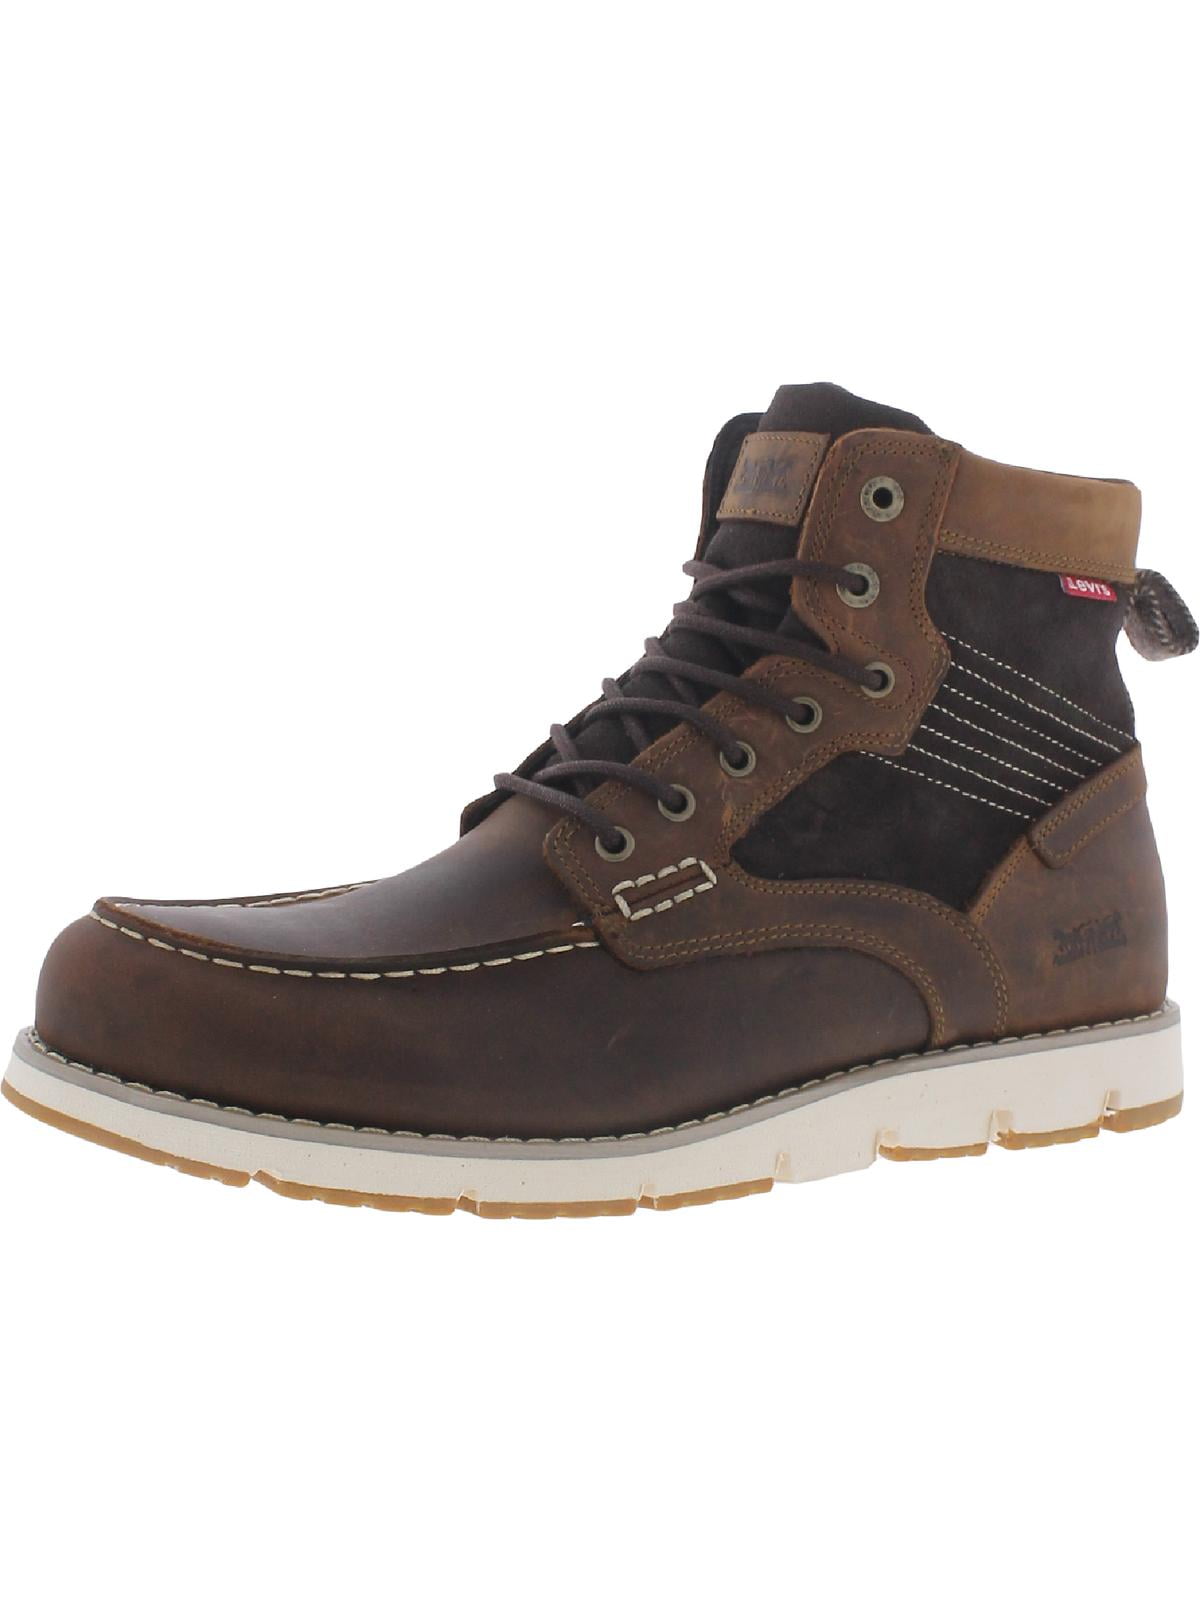 Levi's Men's Dawson  Leather and Canvas Hightop Boots Brown 13 -  